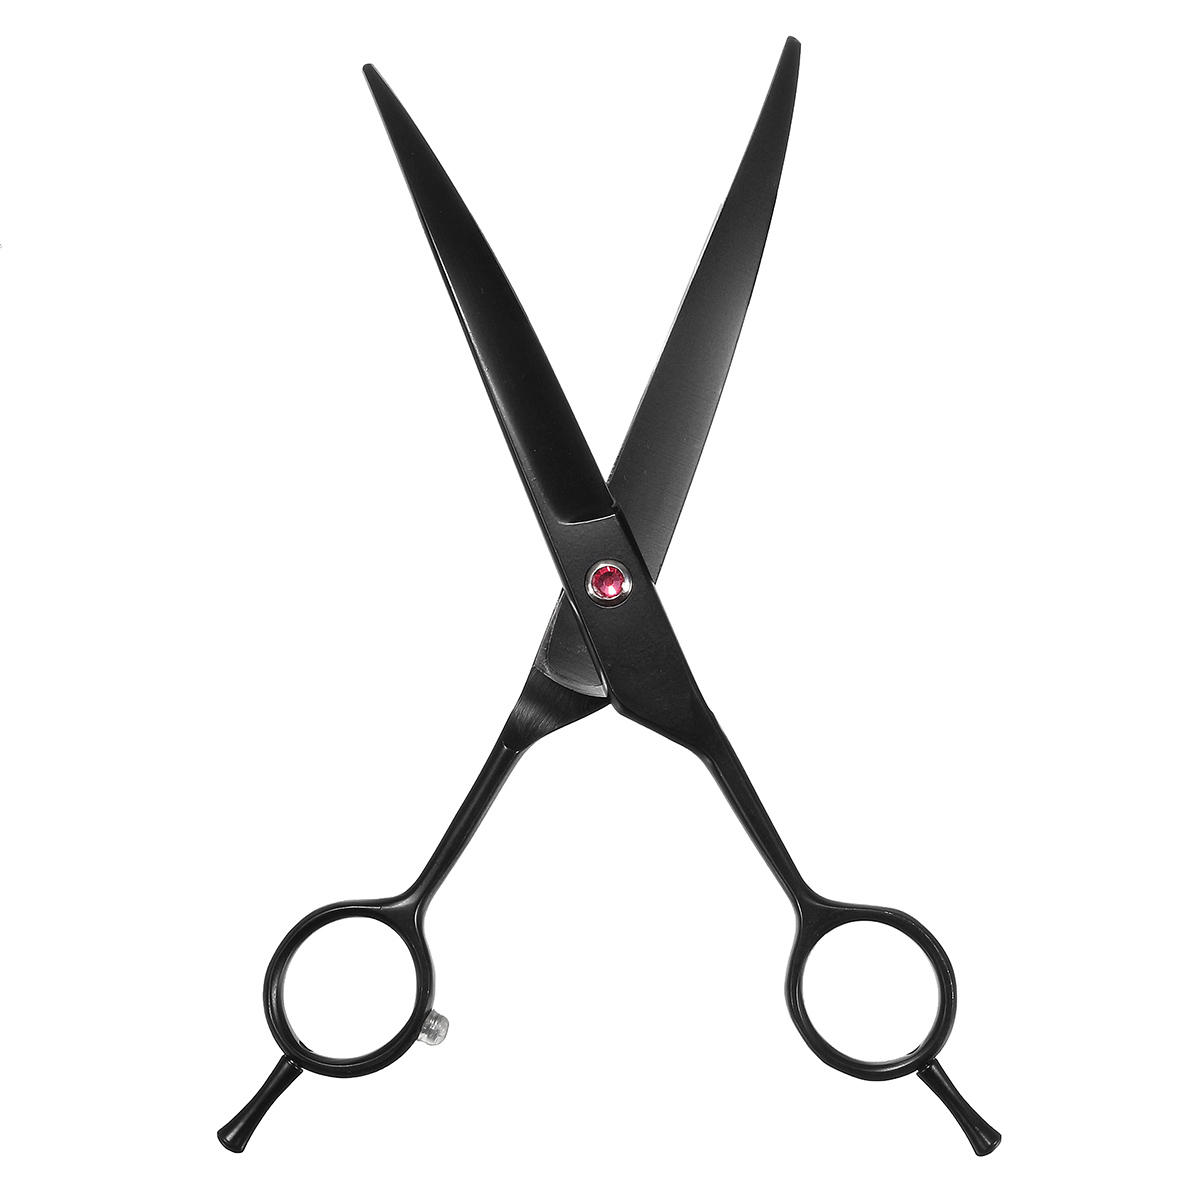 7" Professional Stainless Steel Pet Dog Grooming Scissors Curved Haircut Shears-heyidear